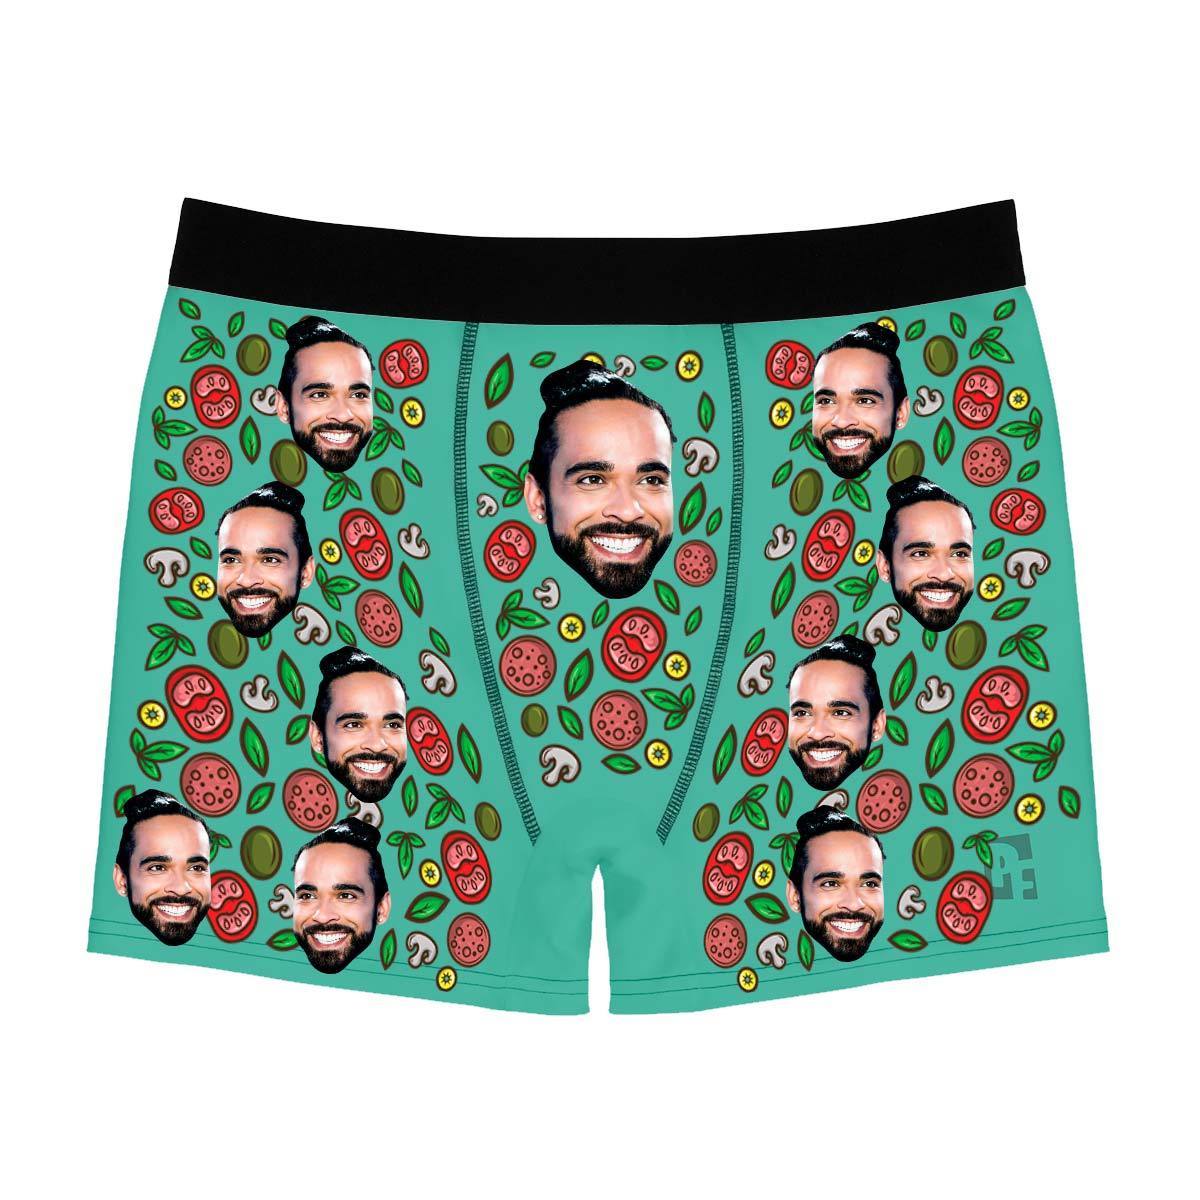 Mint Pizza men's boxer briefs personalized with photo printed on them